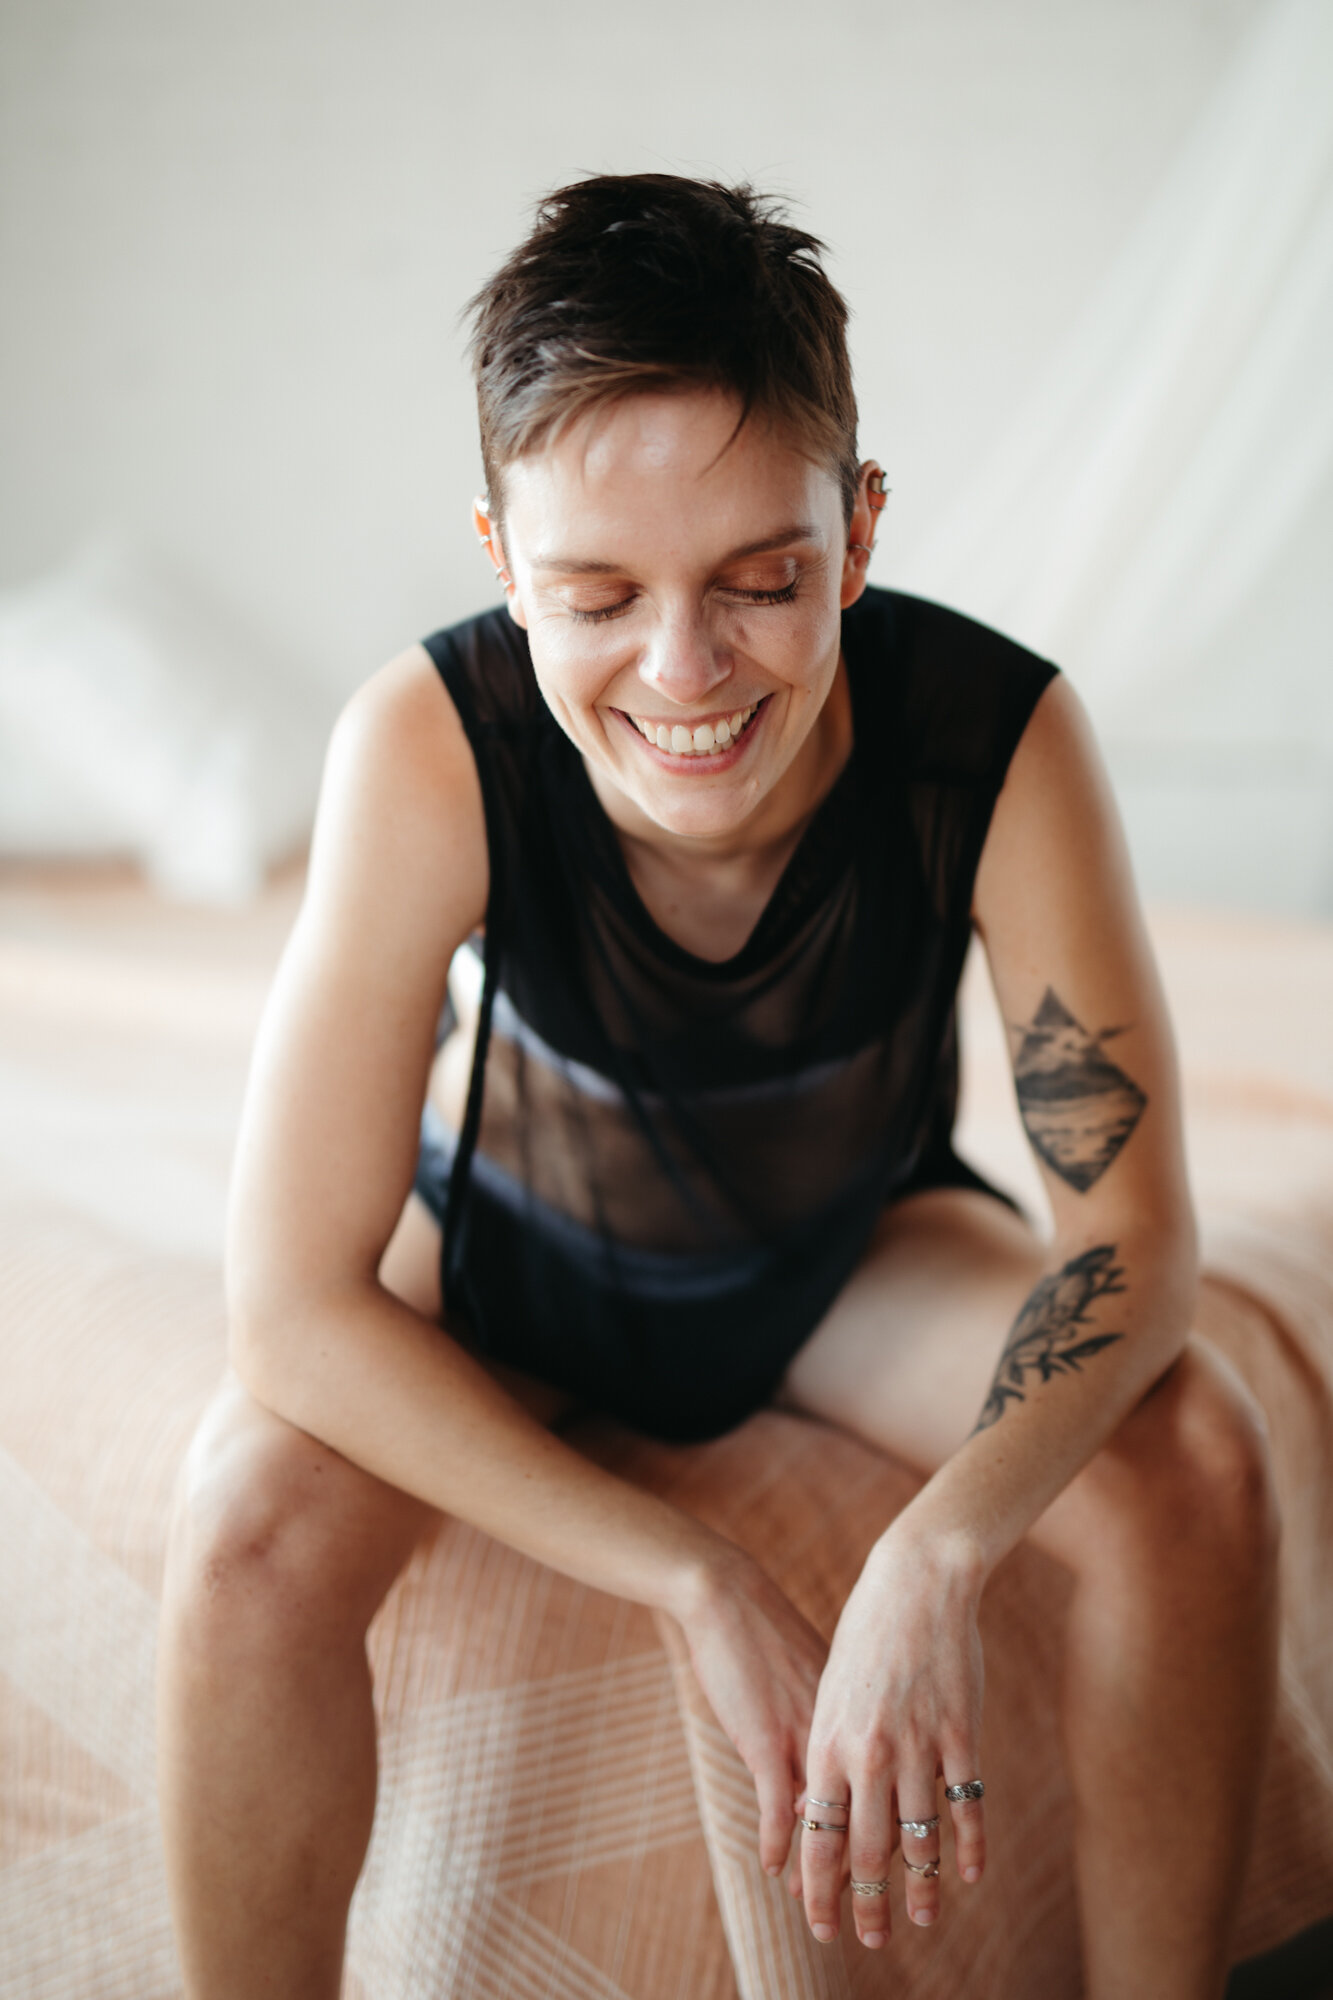 Queer masculine boudoir photo of person with short hair sitting on the edge of a bed laughing